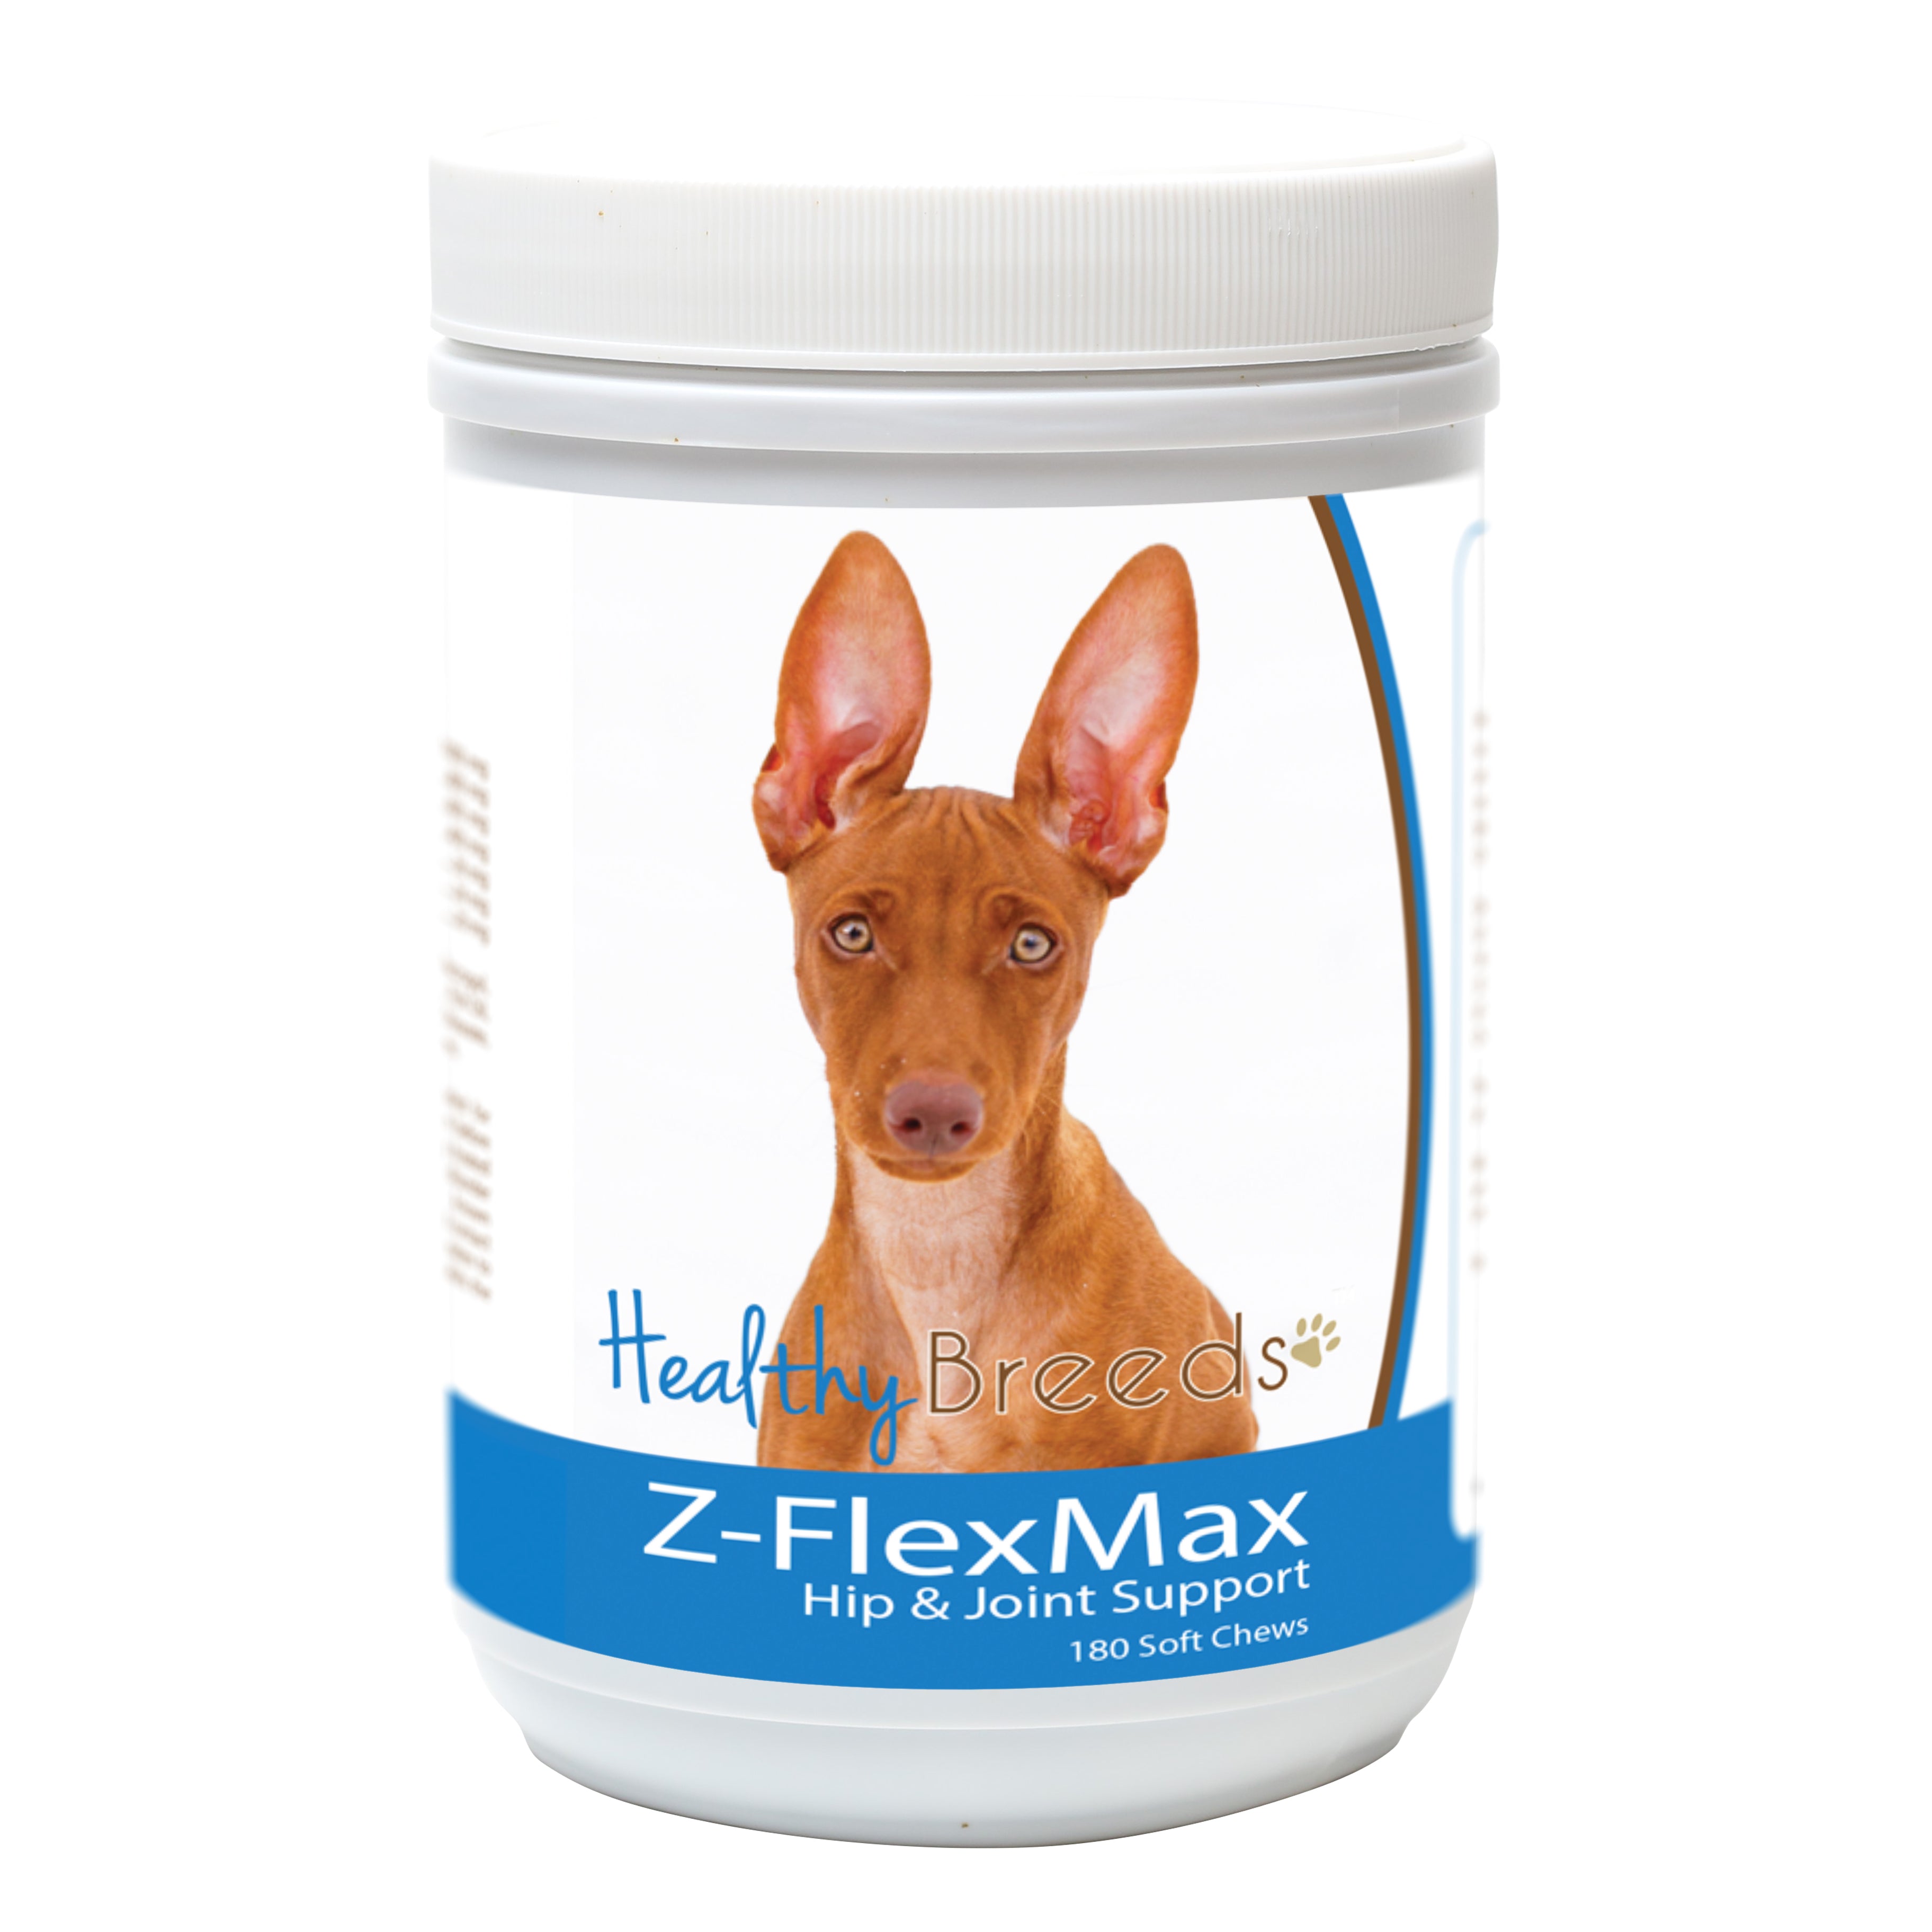 Cirnechi dell'Etna Z-Flex Max Dog Hip and Joint Support 180 Count